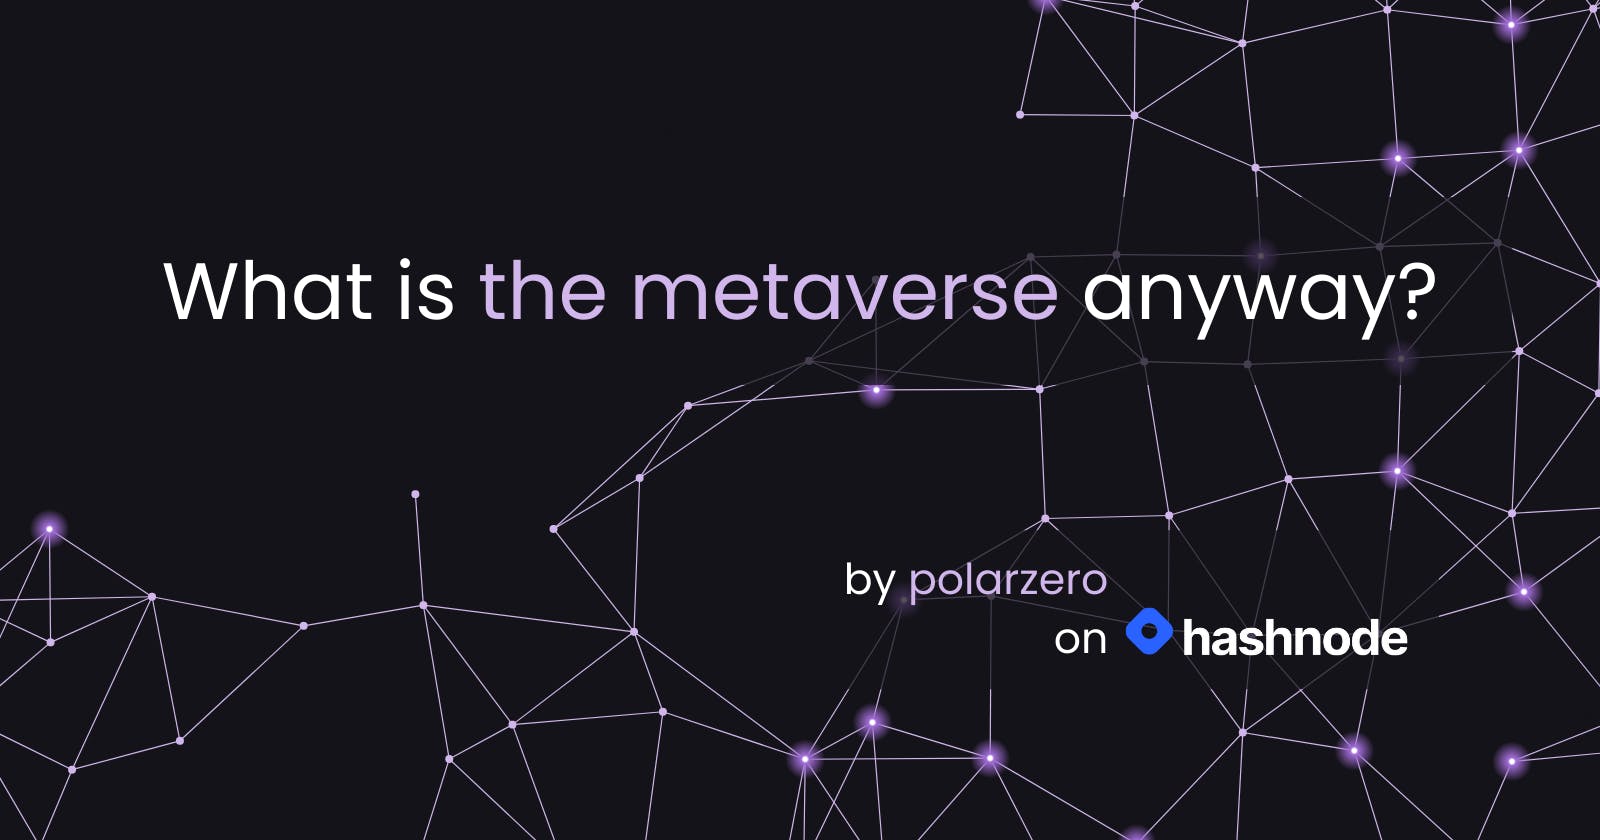 What is the metaverse anyway?